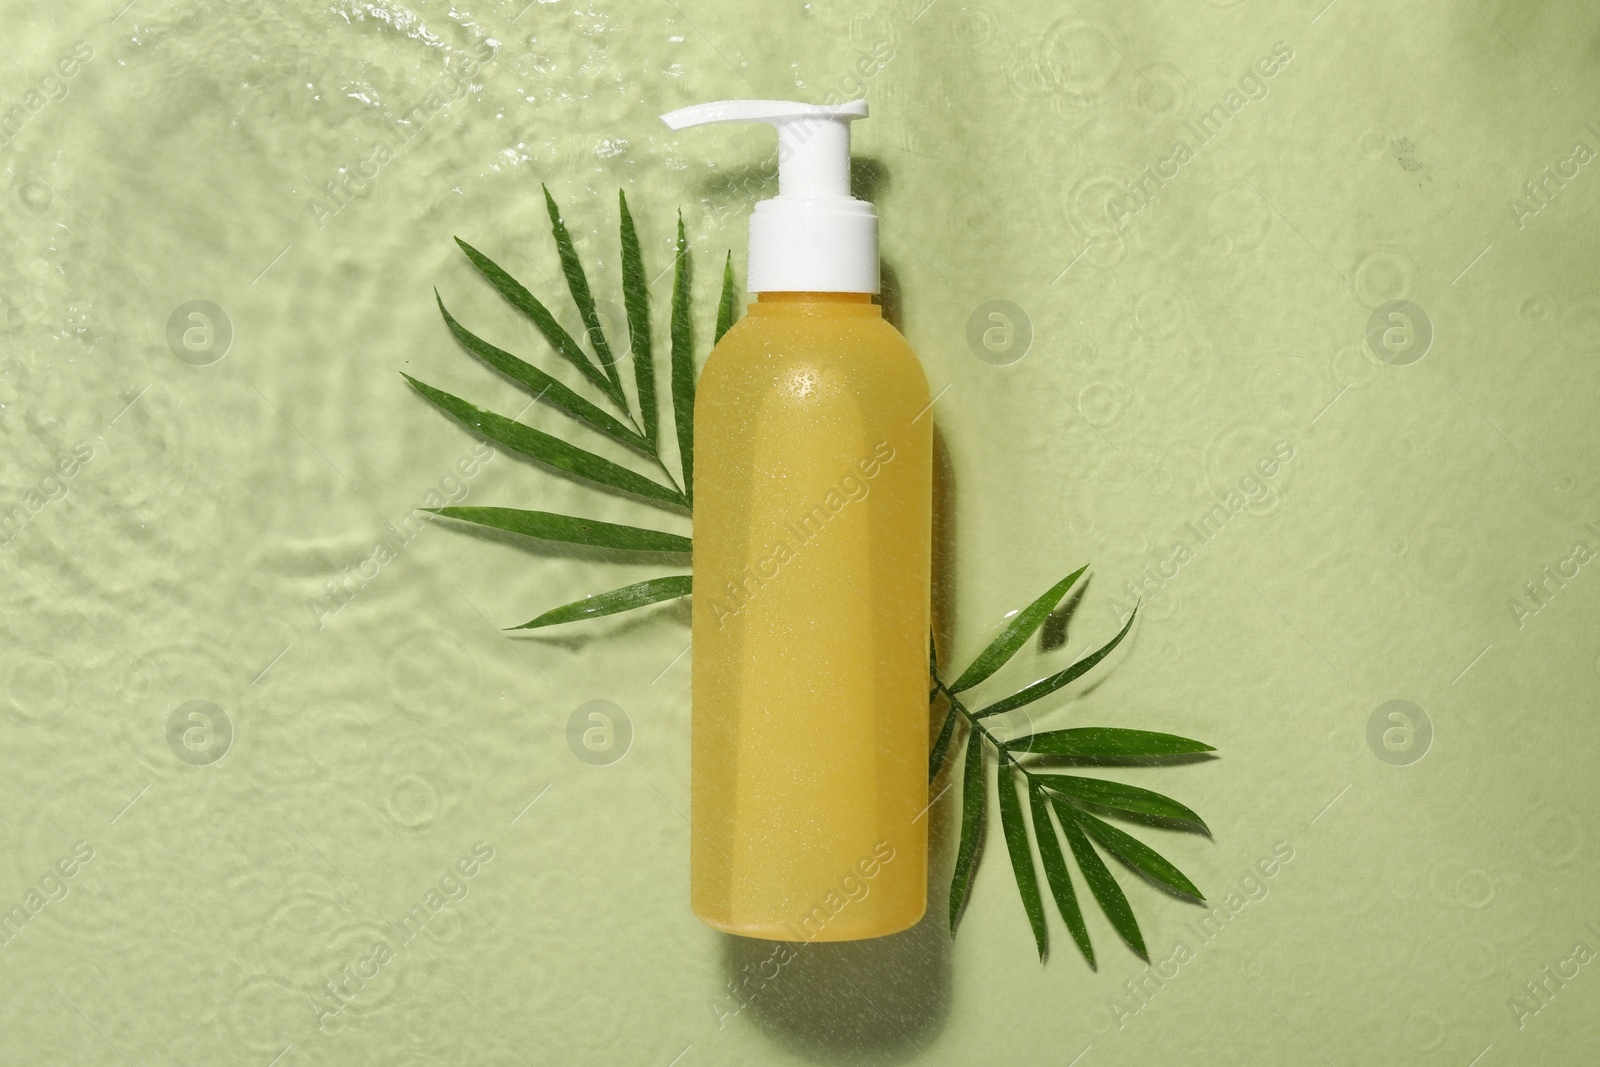 Photo of Bottle of facial cleanser and leaves in water against olive background, flat lay